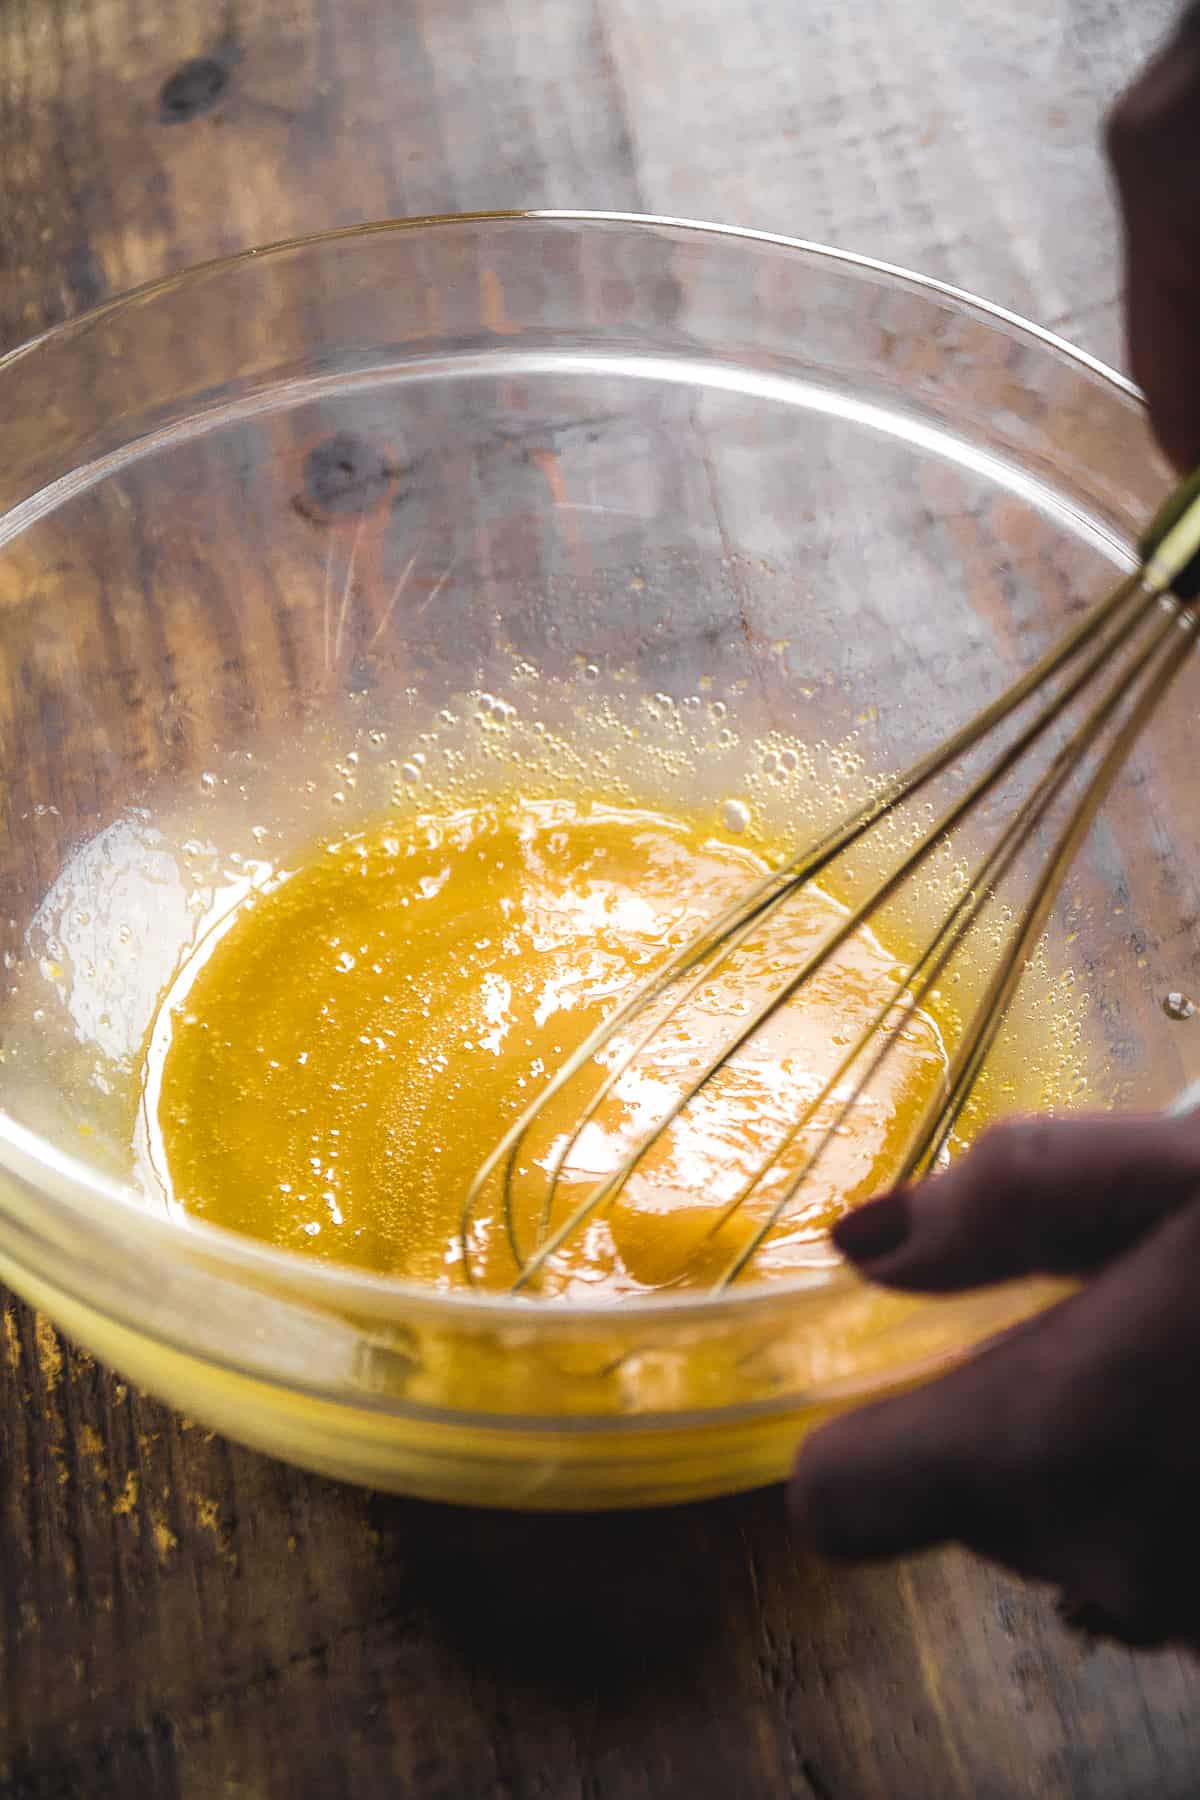 Person whisking wet cookie ingredients in a glass bowl on a wooden surface.